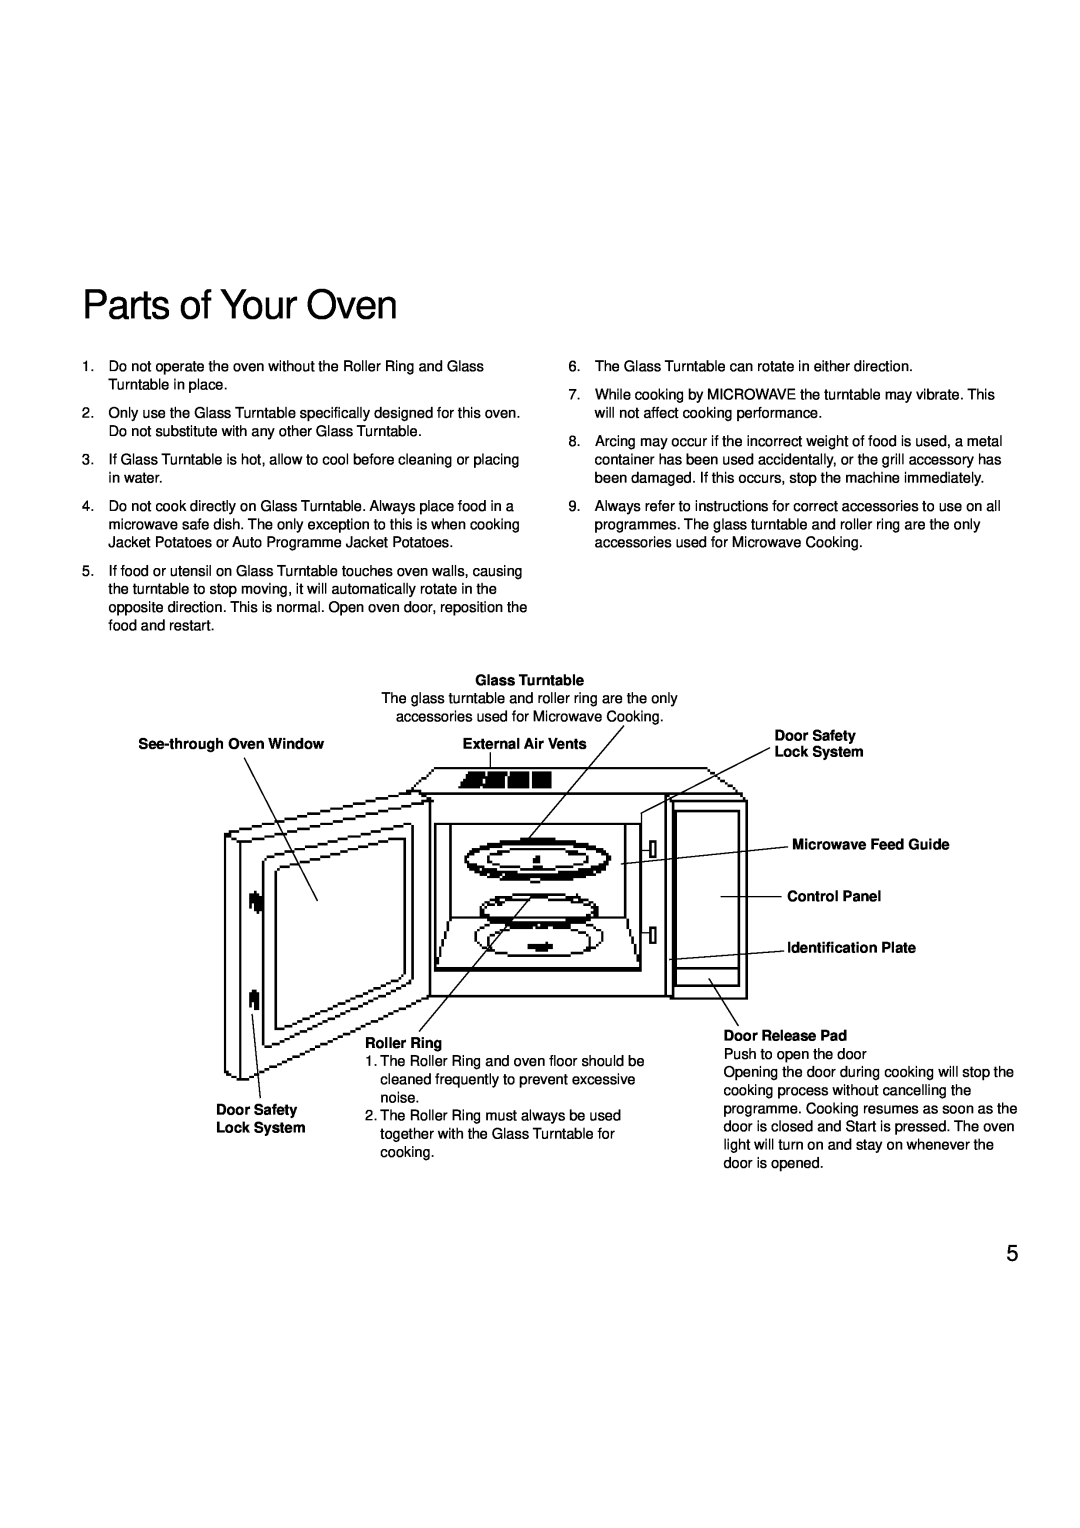 Creda MBO55 manual Parts of Your Oven, See-through Oven Window Door Safety Lock System, Glass Turntable 